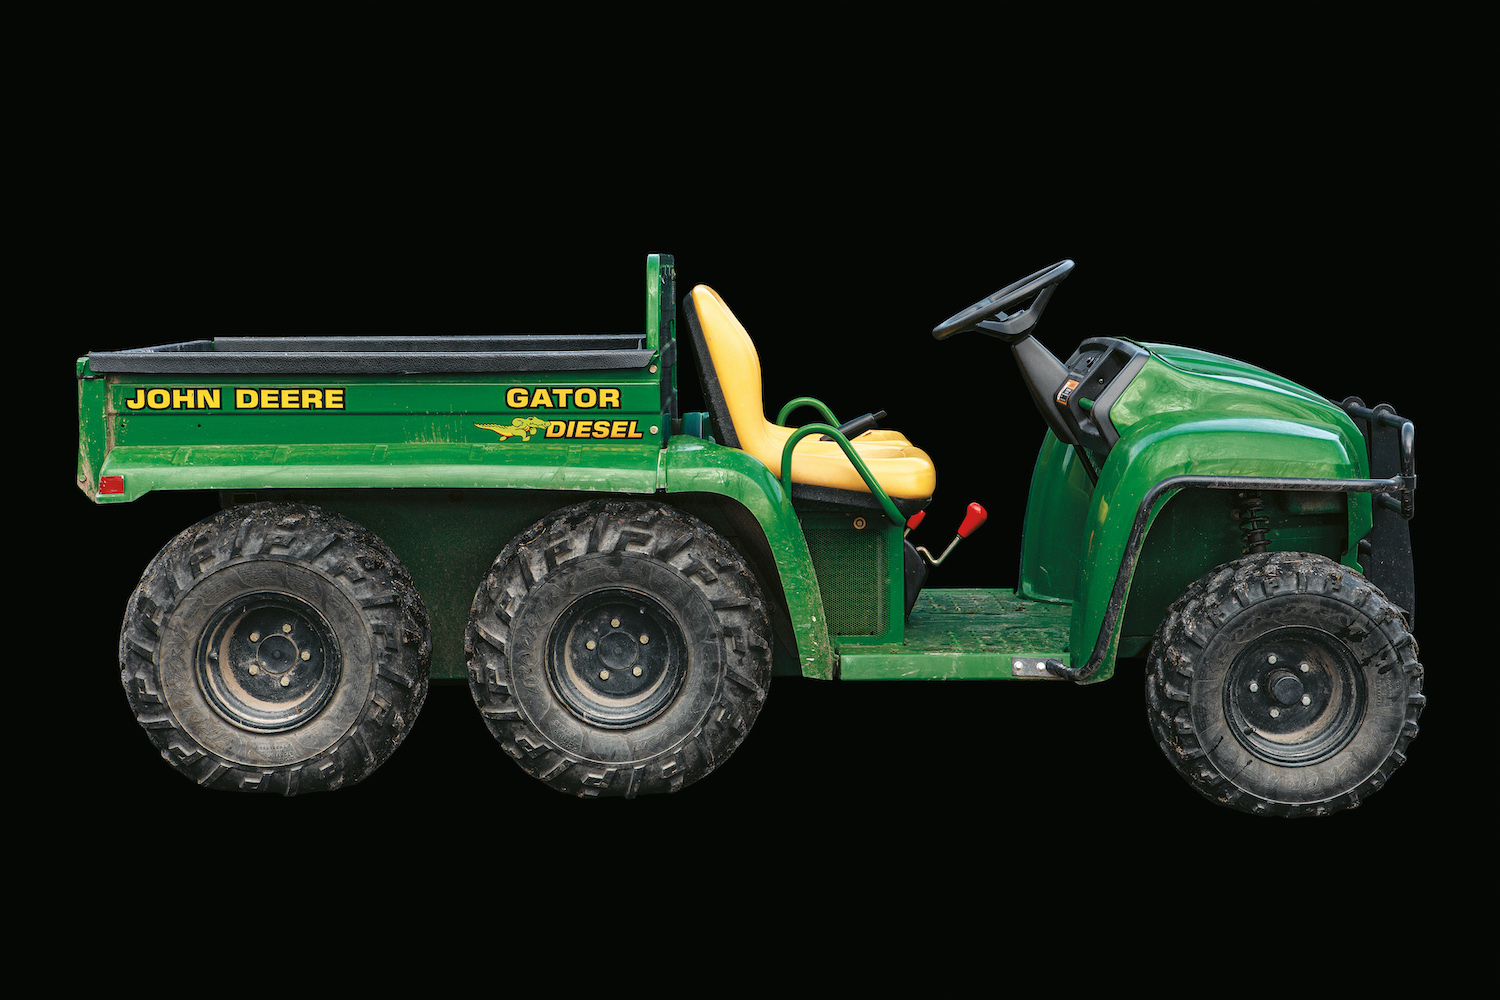 <strong>Matt Hranek, John Deere Gator</strong><br>“When we bought our house Upstate, all my neighbors were like, you need a John Deere Gator! What happened was, after 9/11, John Deere gave all these Gators to the disaster site. When they were done being used, they brought them back, overhauled them and sold them. My neighbor was like, 'They have a whole bunch of these that came out of the World Trade that they’ve reconditioned, you should go buy one.' I’ll tell you, I couldn’t live up there without it, I couldn’t have built my house without it. We have the most fun. I’ve taught my daughter how to drive with that thing.”